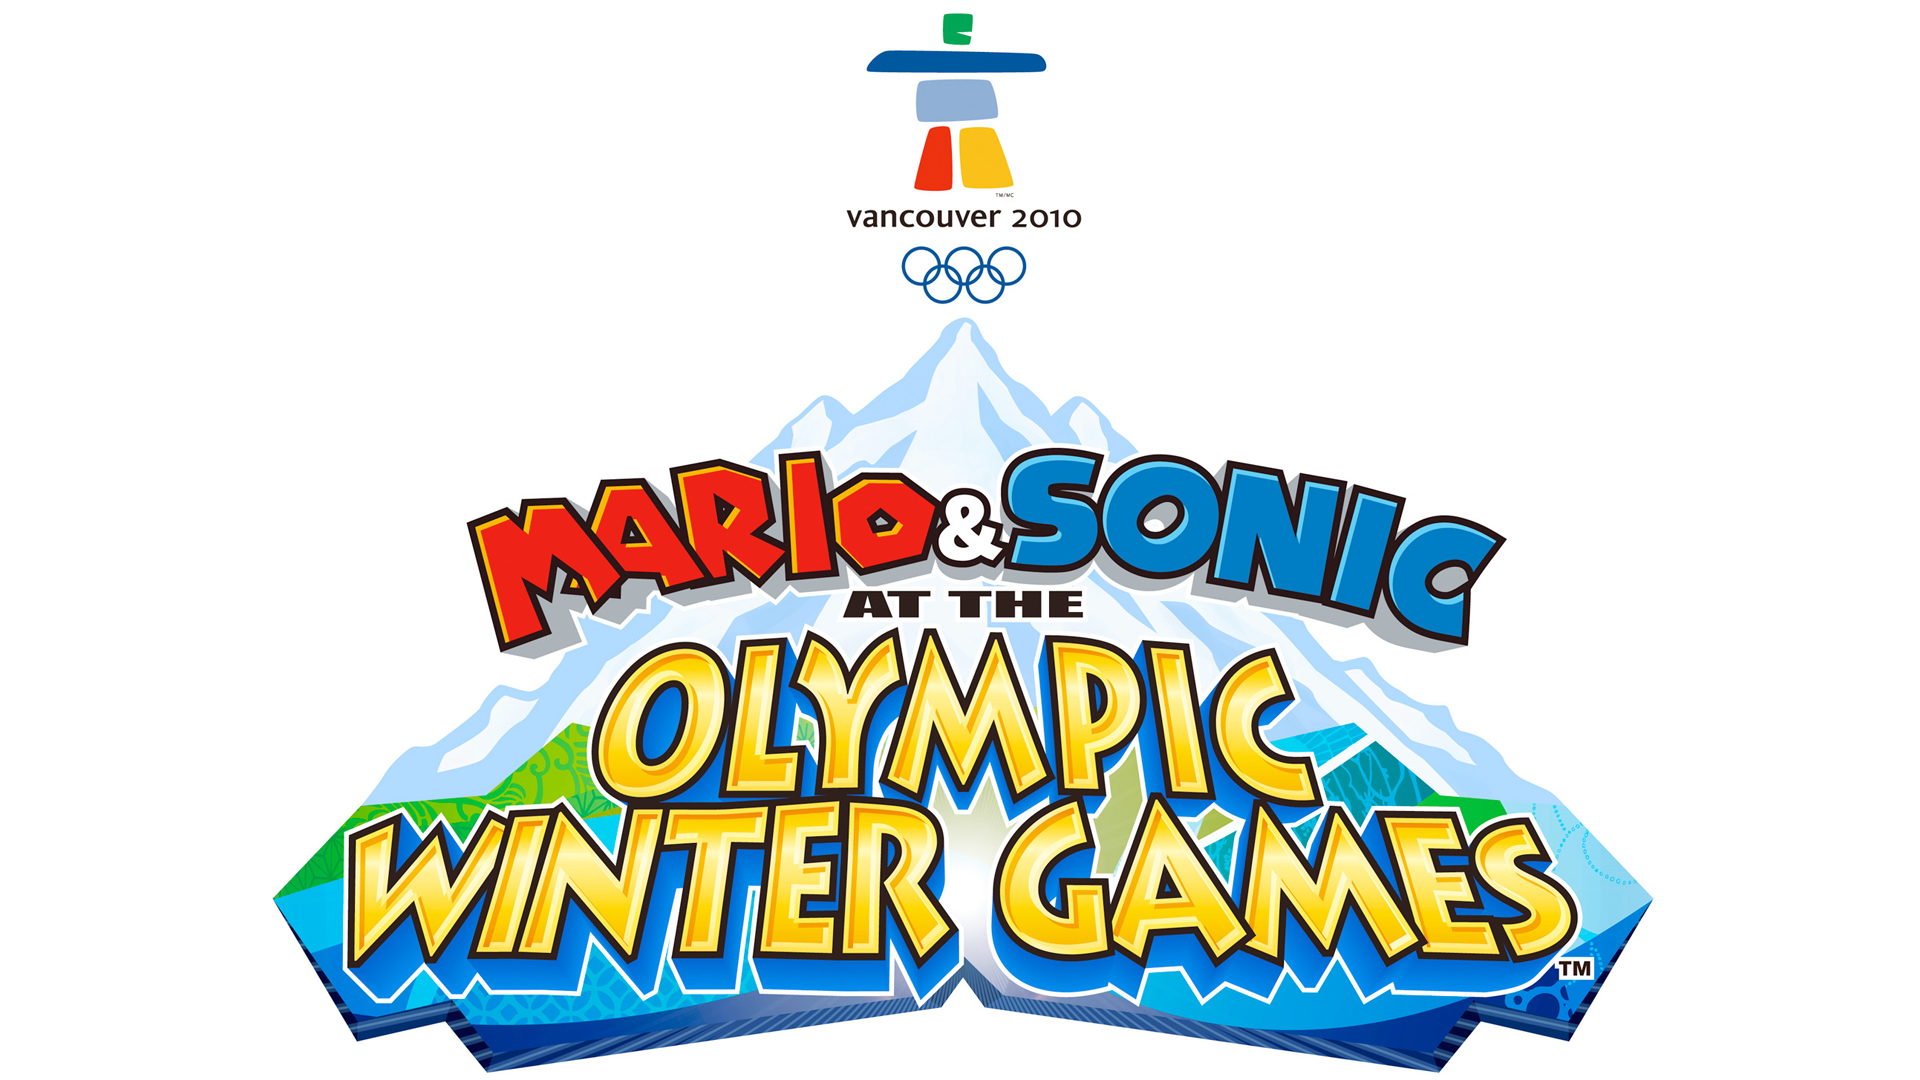 Mario & Sonic at the Olympic Winter Games (Wii) Logo